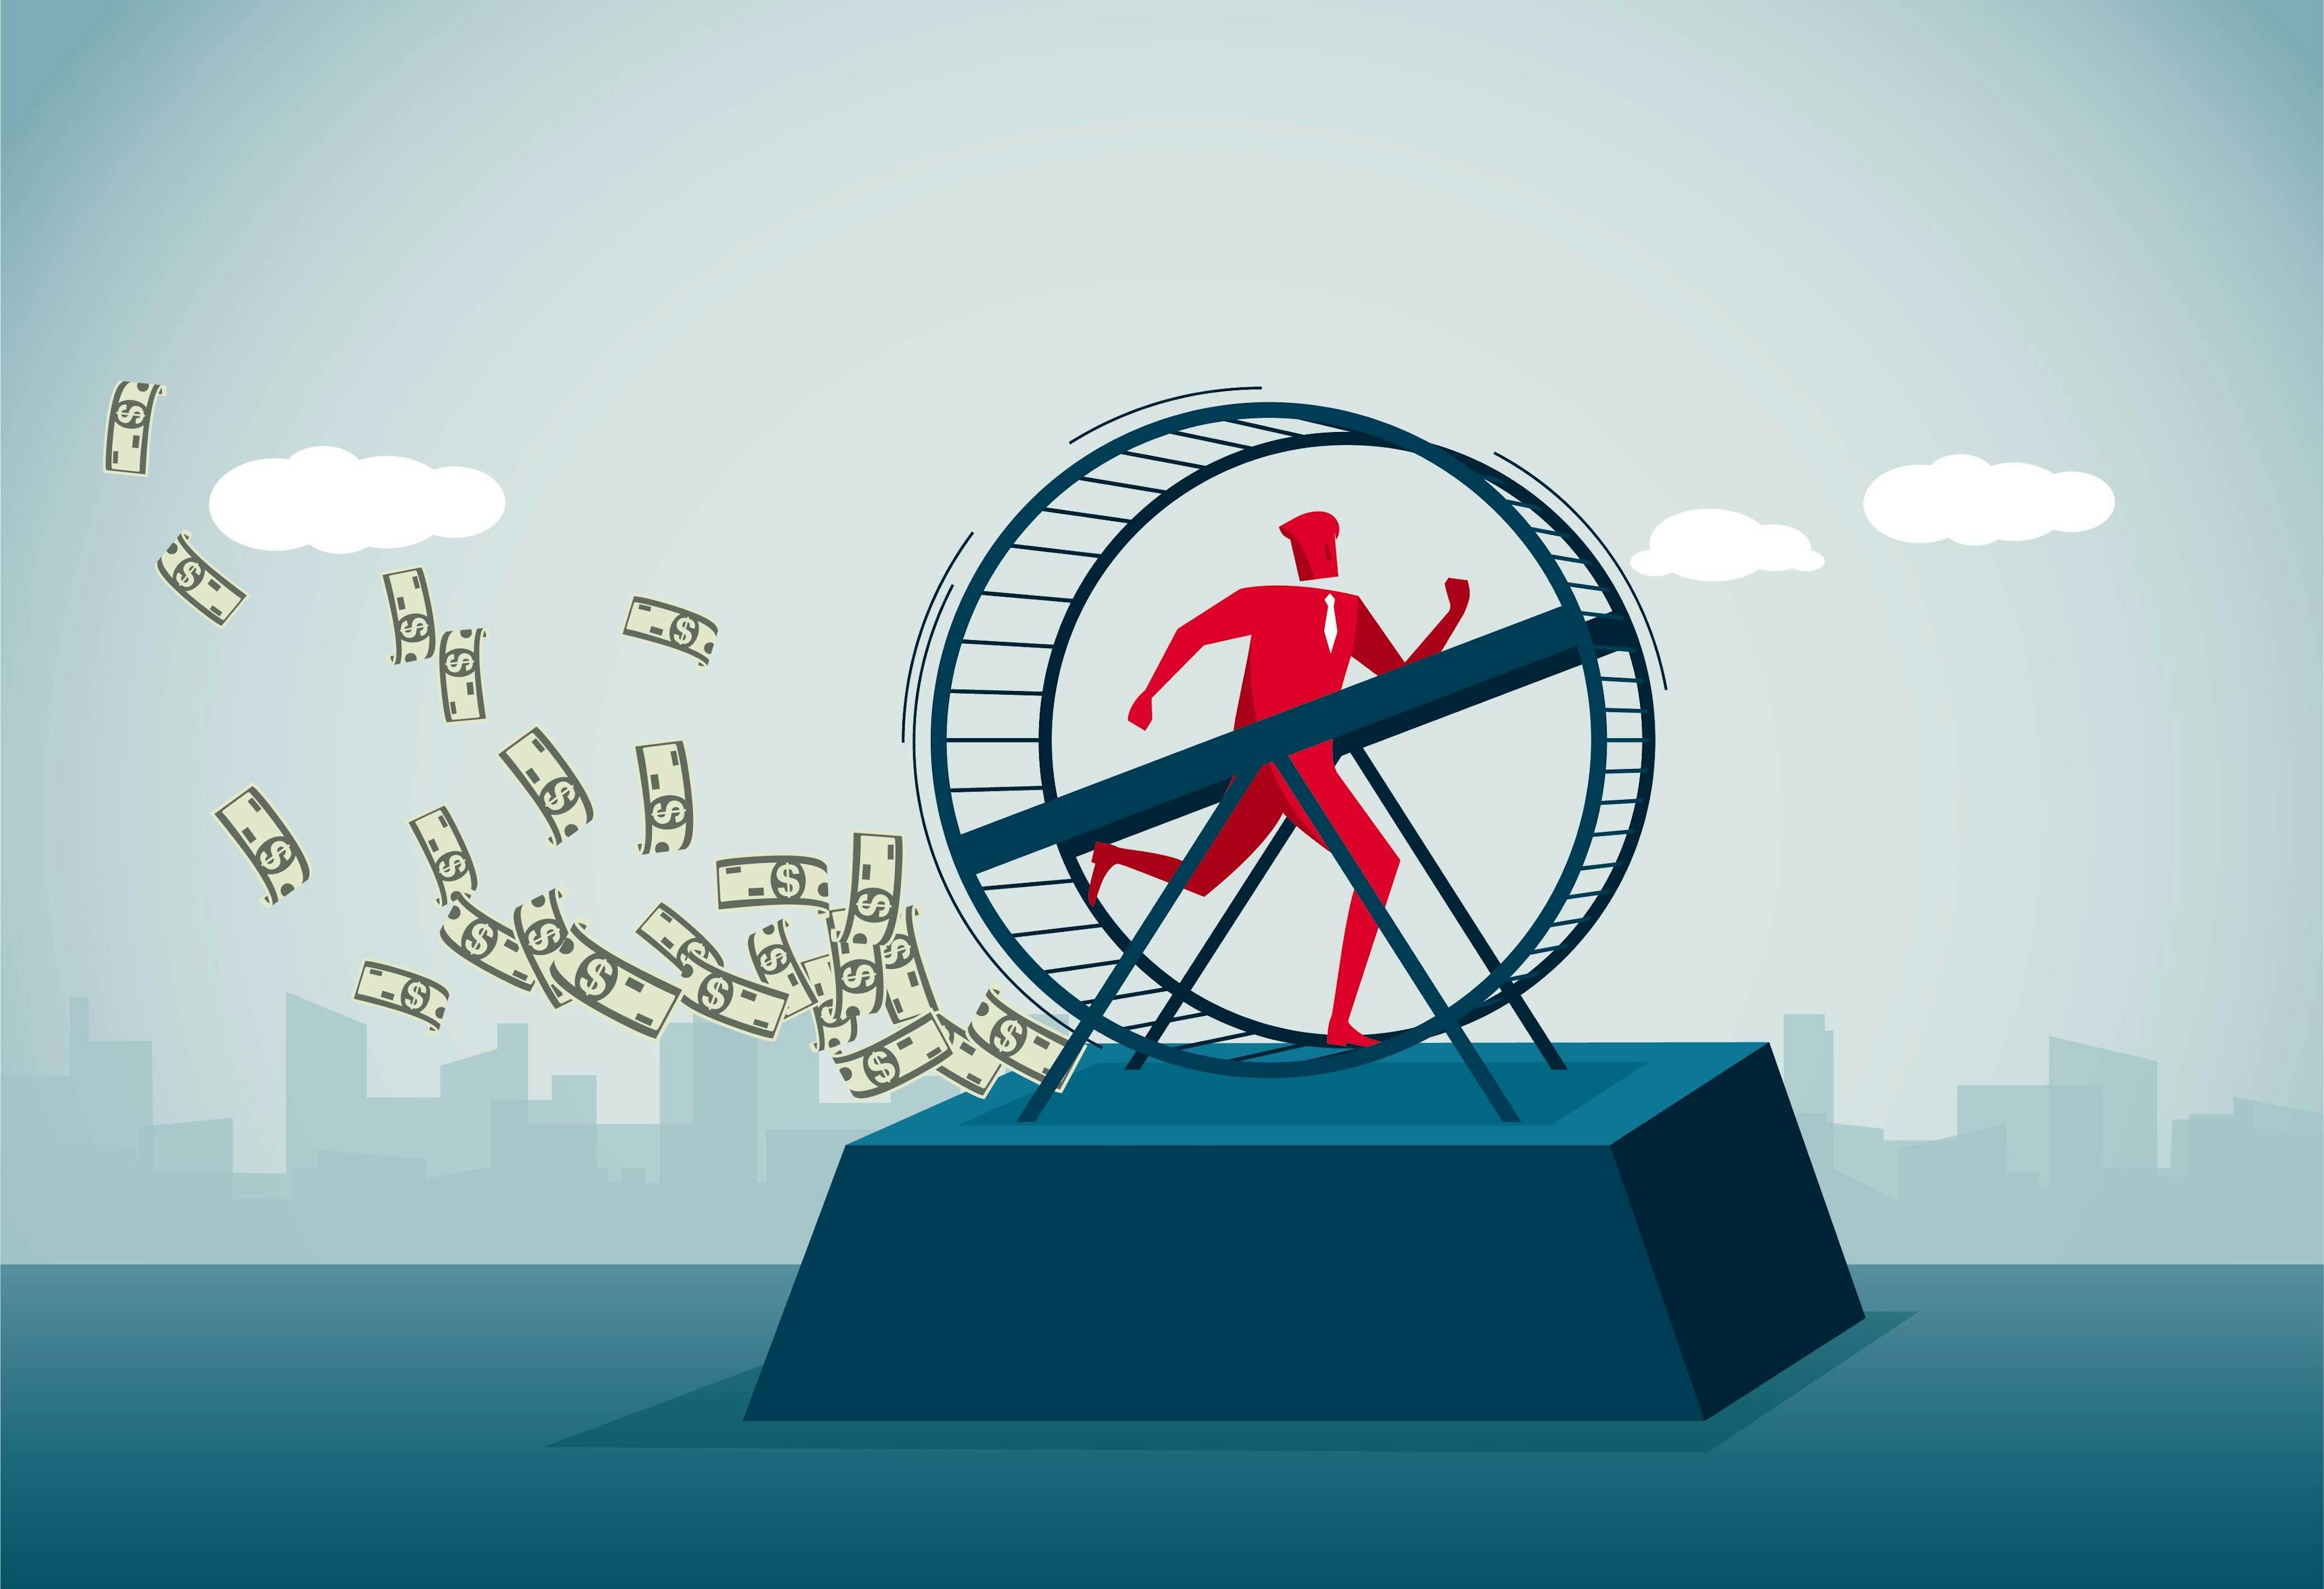 Image of a man running in a hamster wheel that is leaking money